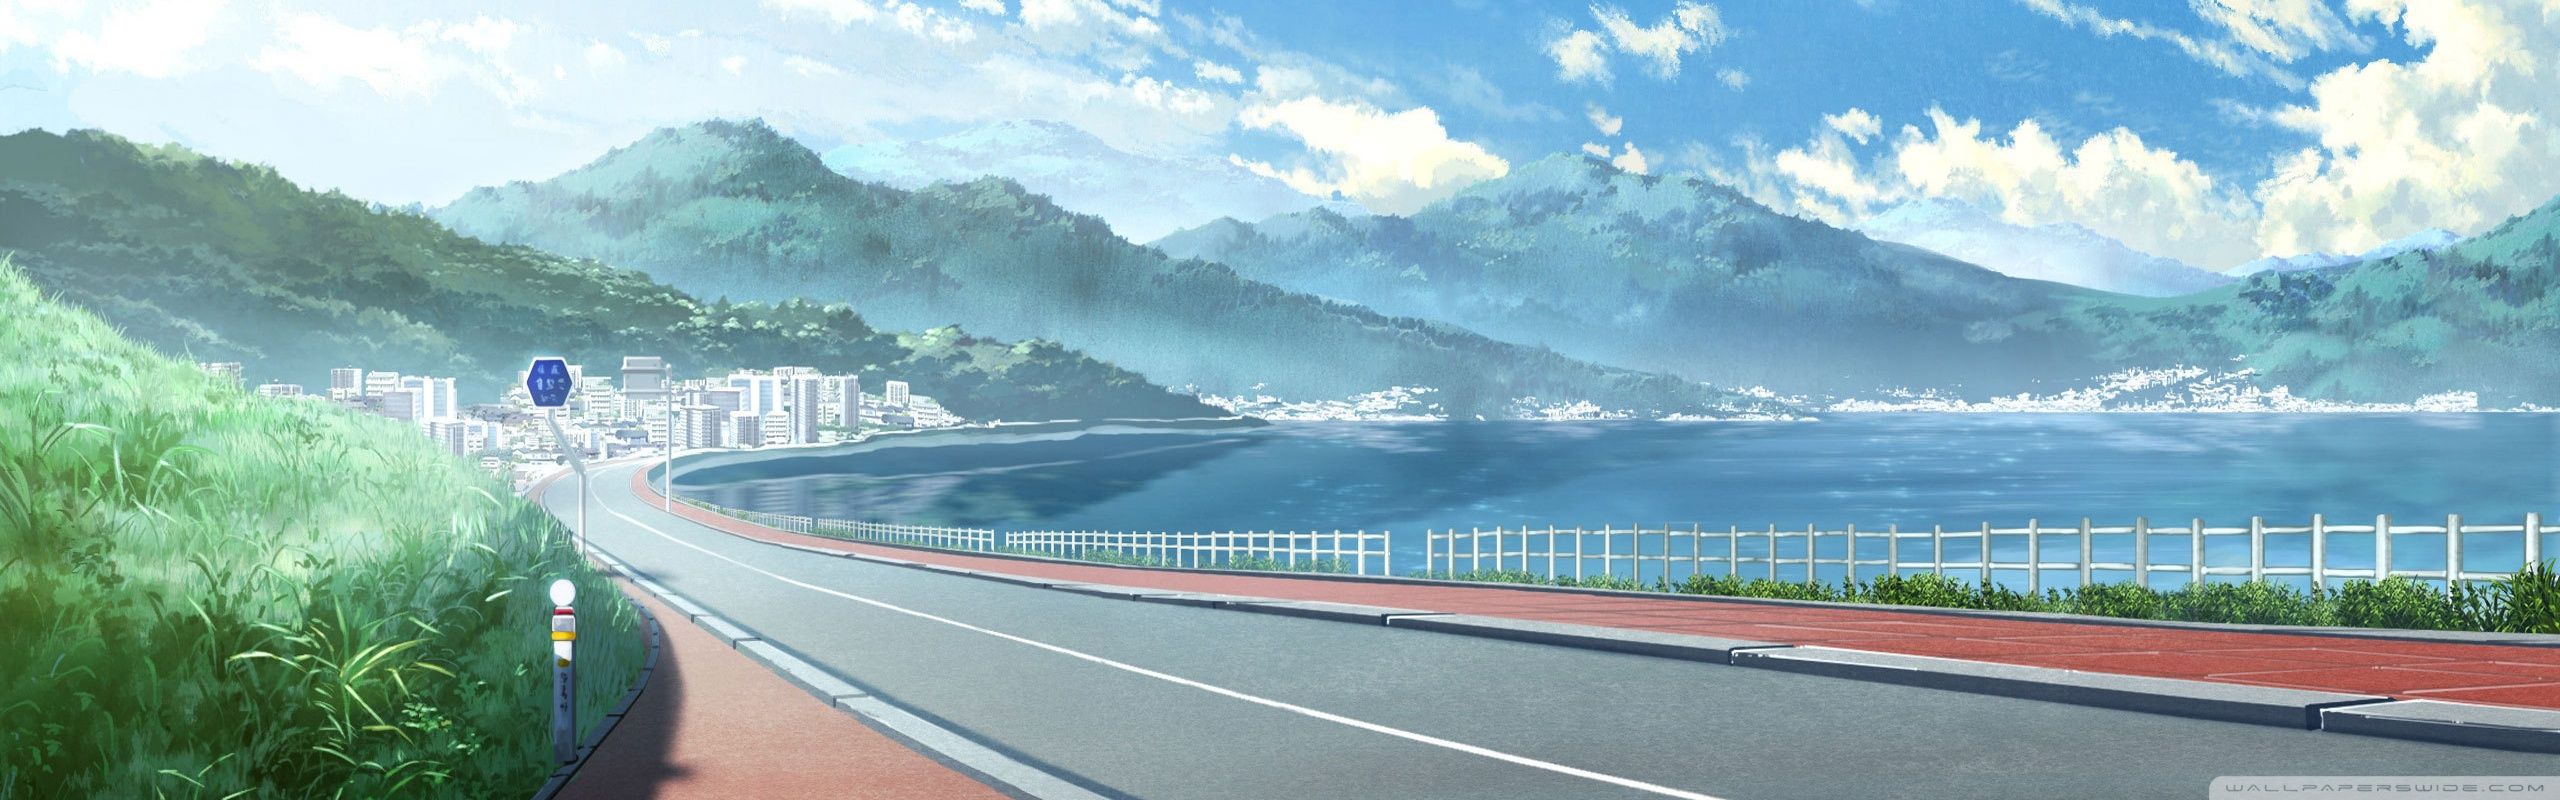 Anime scenery wallpaper road by the sea - Anime landscape